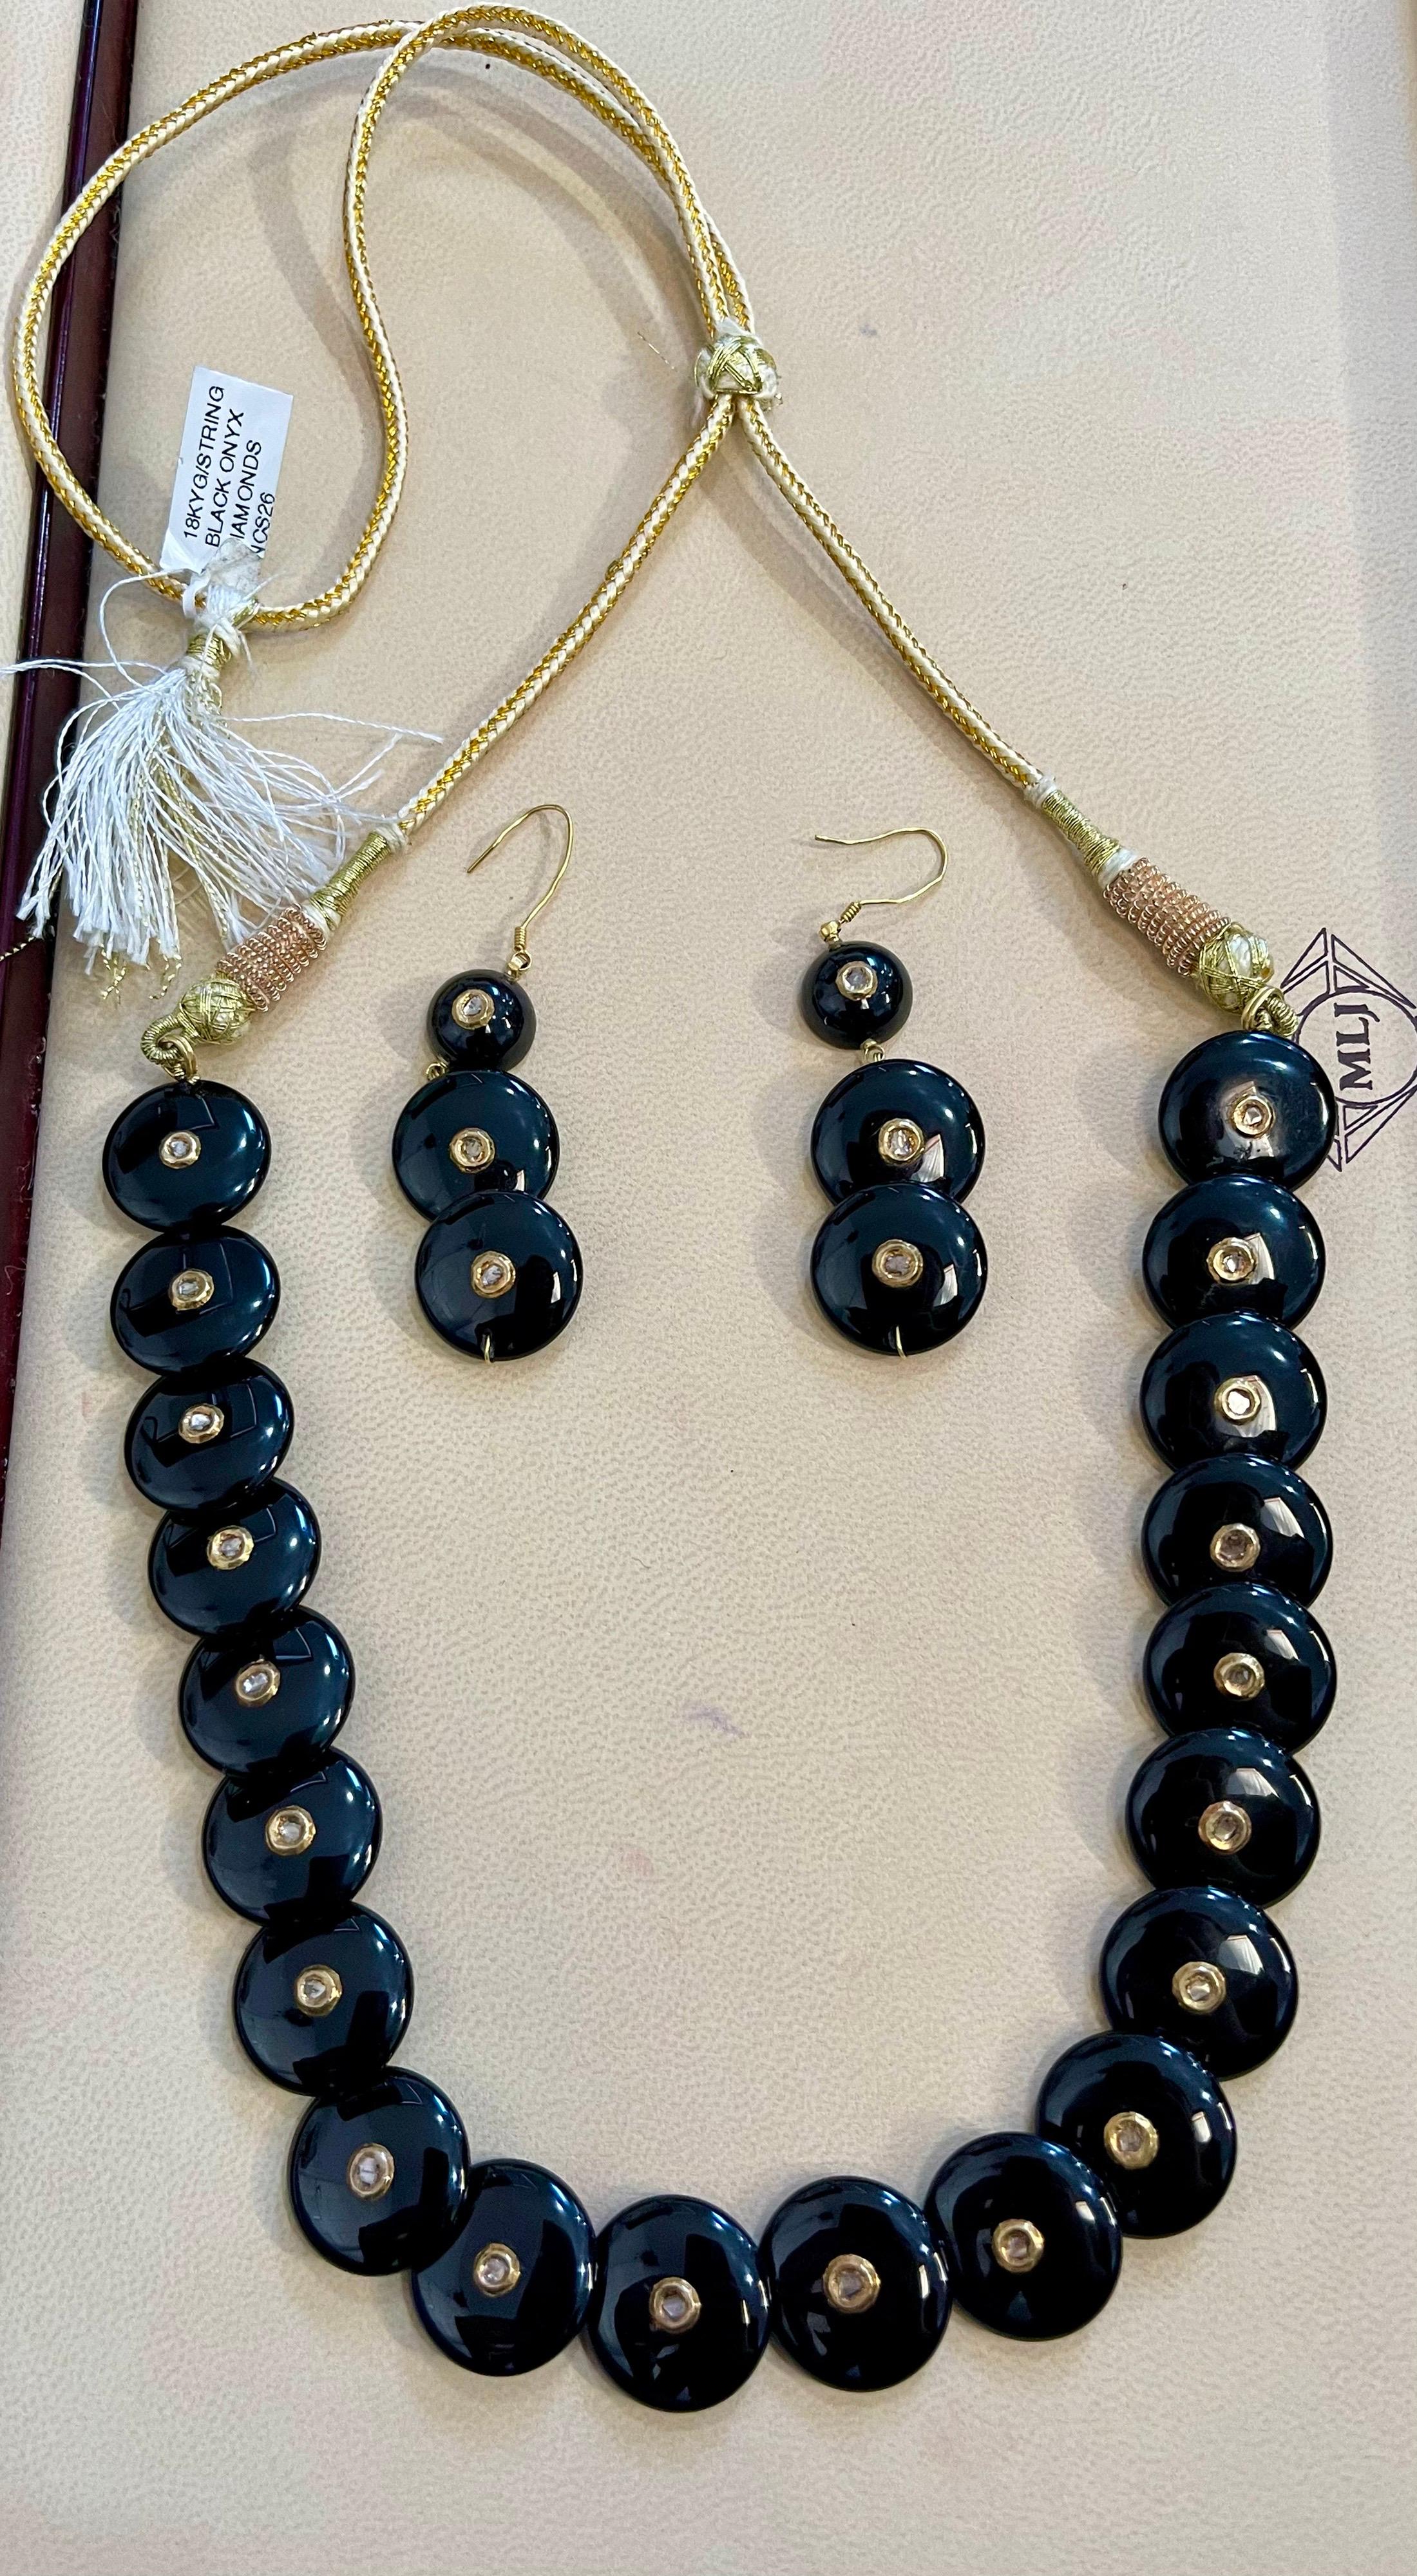 Women's Round Circle Black Onyx with Rose Cut Diamond 18 Karat Gold Necklace, Earrings For Sale